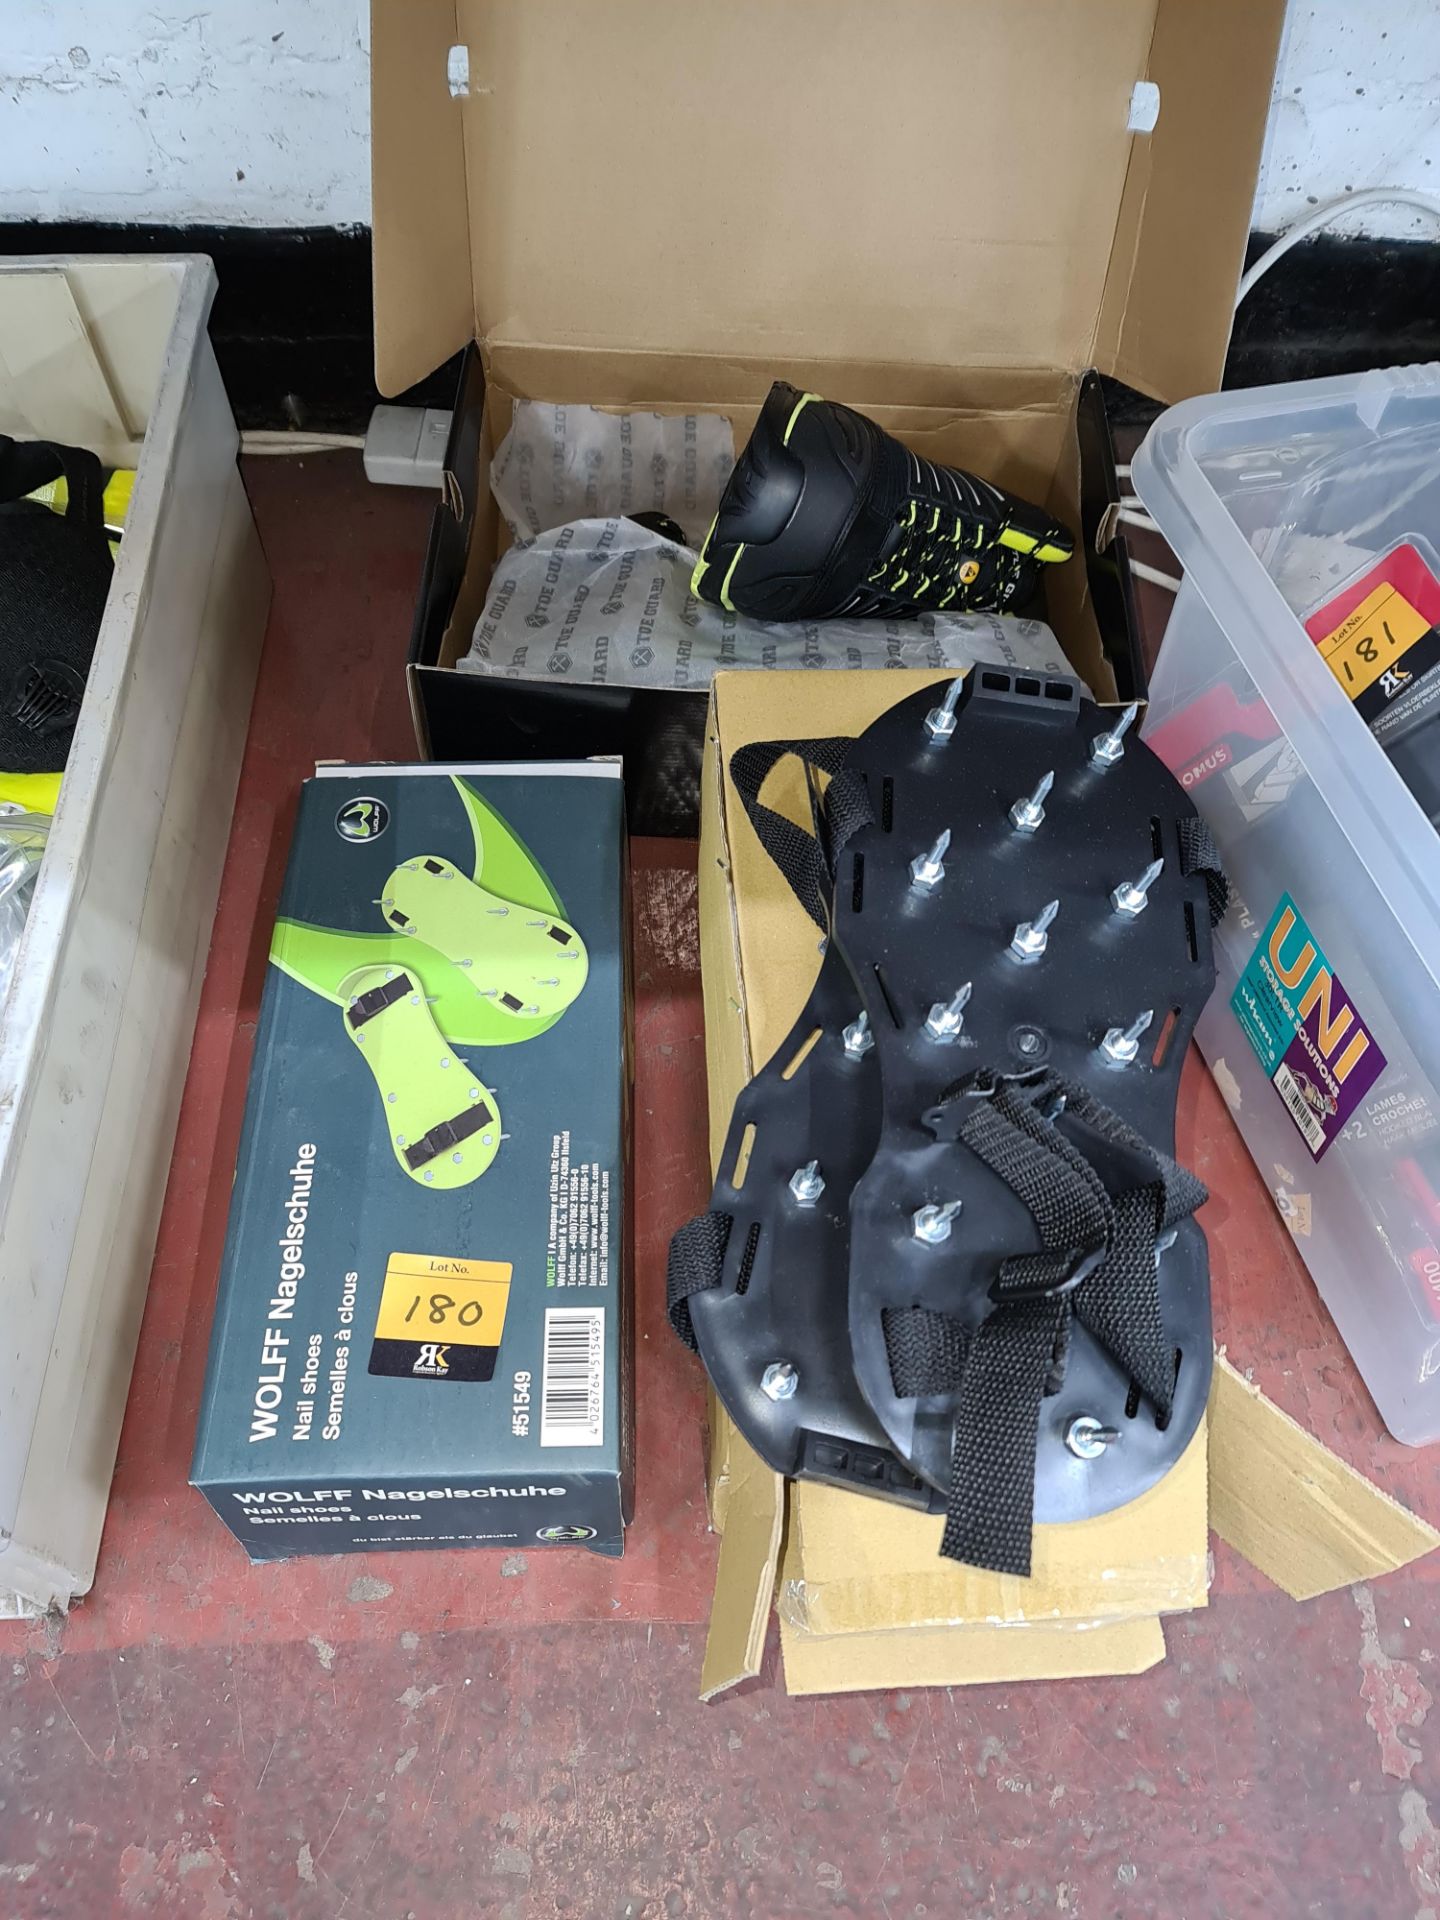 Footwear lot comprising 3 off "nail shoes" & 1 pair of safety boots Lots 31 - 328 comprise the total